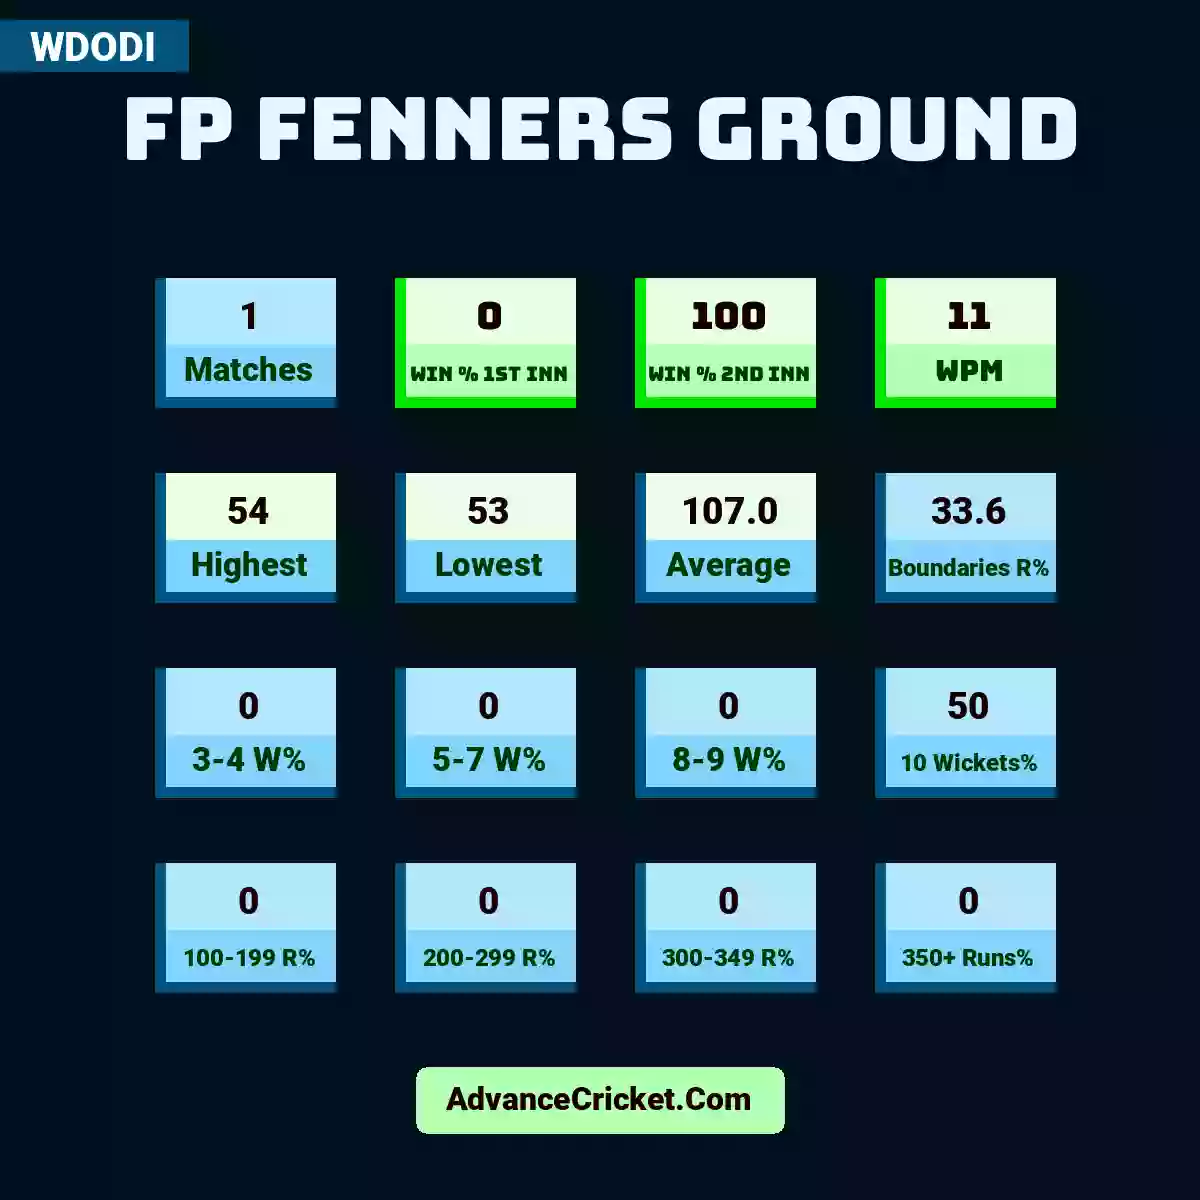 Image showing FP Fenners Ground with Matches: 1, Win % 1st Inn: 0, Win % 2nd Inn: 100, WPM: 11, Highest: 54, Lowest: 53, Average: 107.0, Boundaries R%: 33.6, 3-4 W%: 0, 5-7 W%: 0, 8-9 W%: 0, 10 Wickets%: 50, 100-199 R%: 0, 200-299 R%: 0, 300-349 R%: 0, 350+ Runs%: 0.